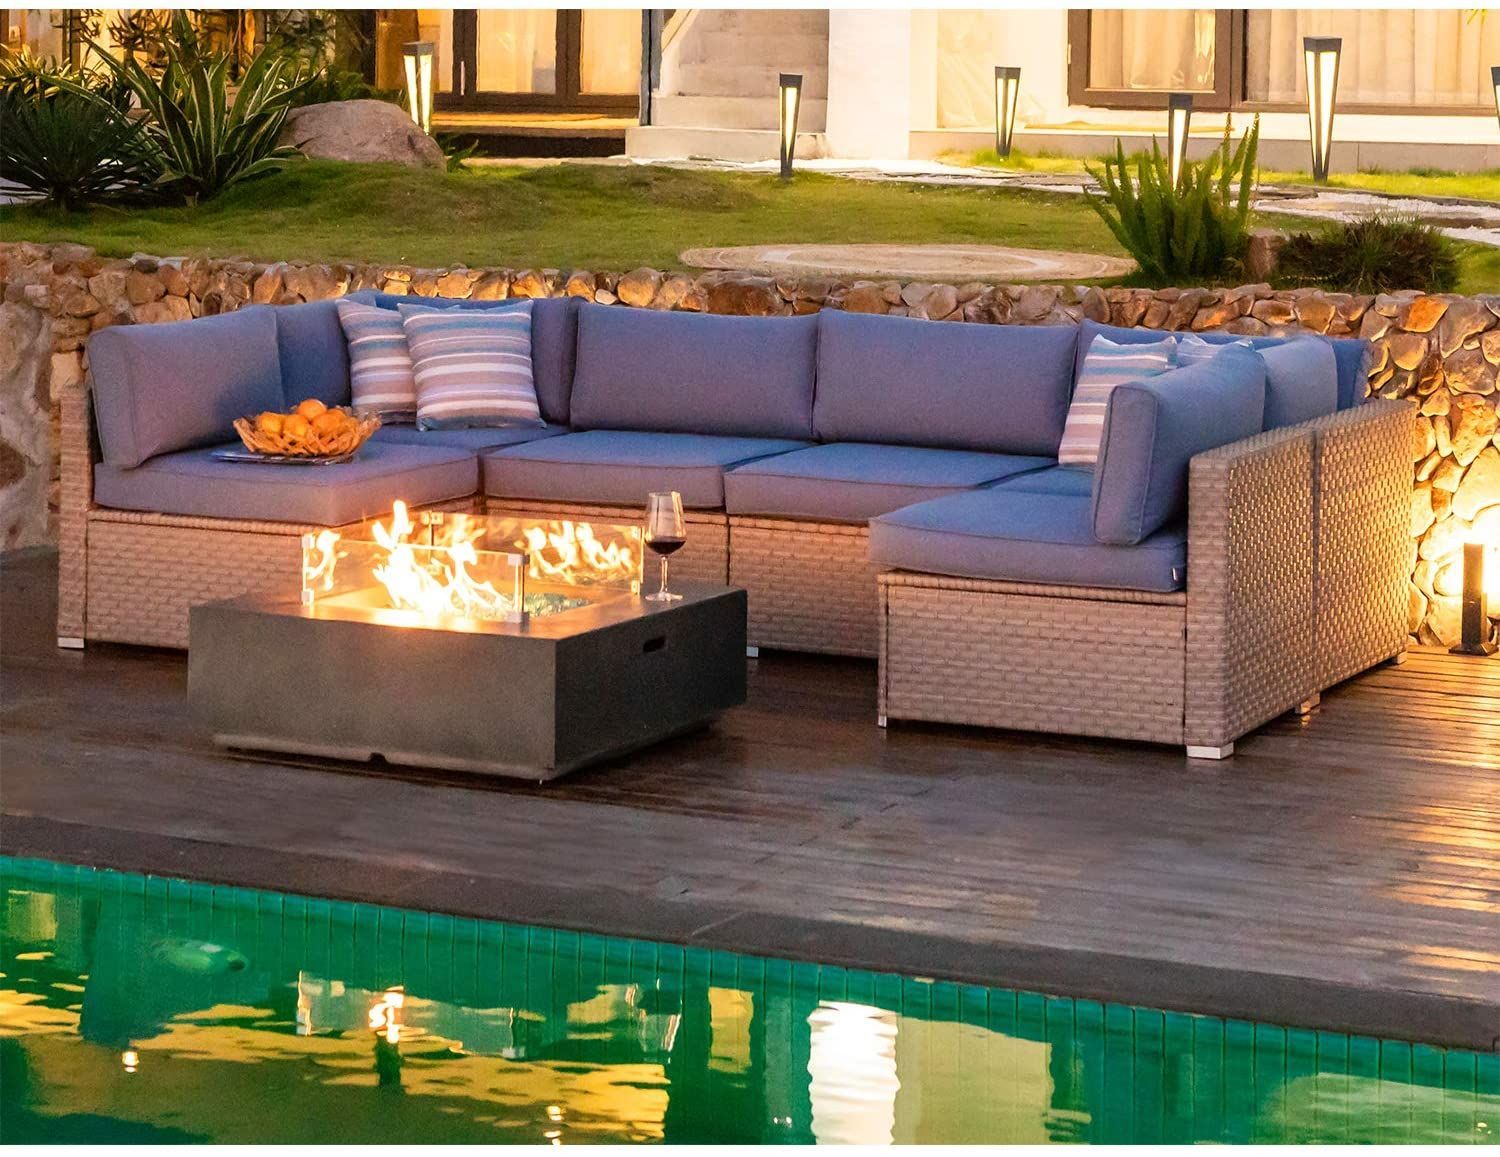 Cosiest 8 Piece Propane Fire Pit Outdoor Wicker Sectional Sofa, Warm Gray Patio  Furniture Set W 35 Inch Square Celadon Fire Table (50,000 Btu), Tank Cover  And W… | Gray Patio Furniture, Patio Within Fire Pit Table Wicker Sectional Sofa Set (View 12 of 15)